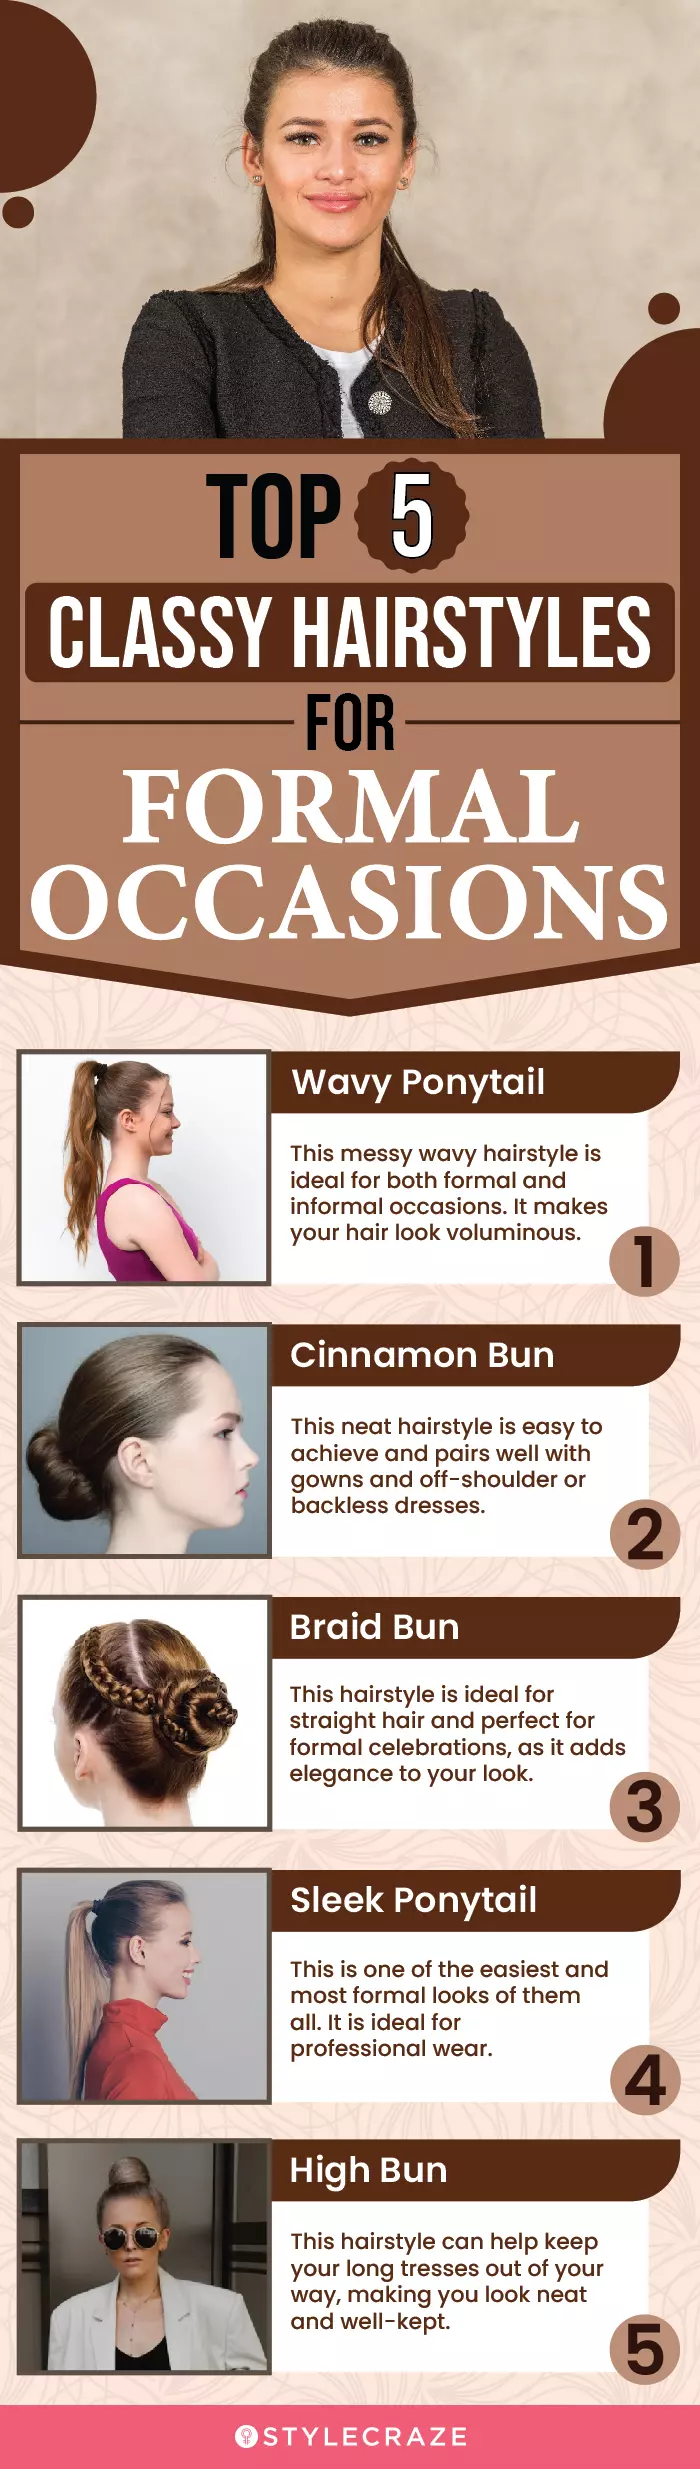 9 Gorgeous Formal Hairstyles to Wear on Your Next Special Event - Pondview  landscape